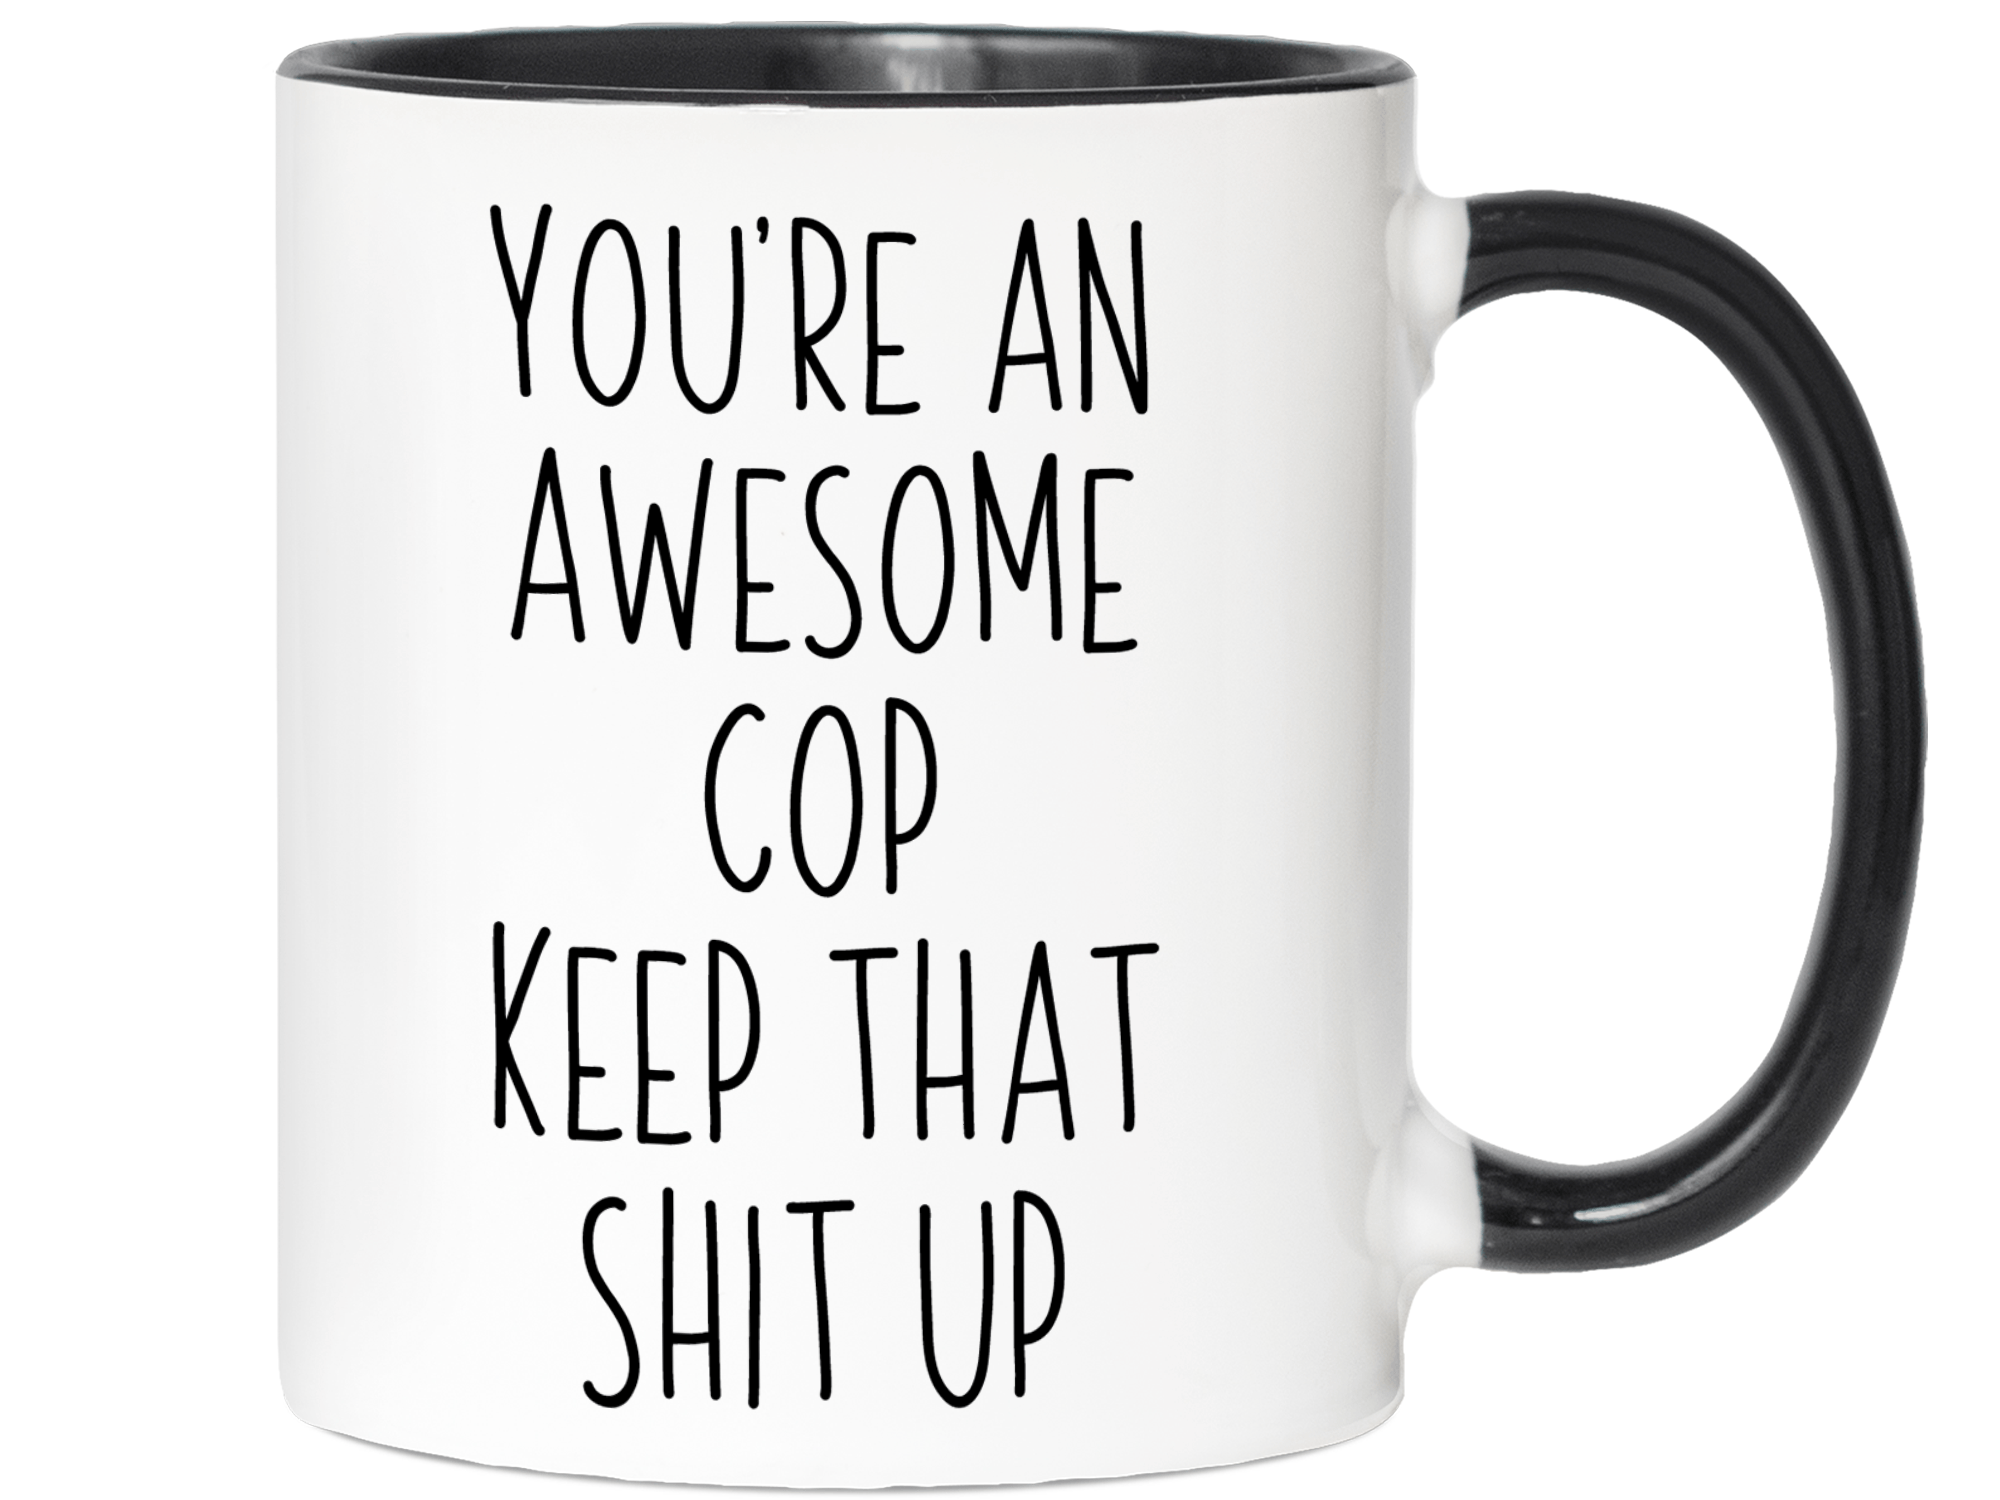 Gifts for Cops - You're an Awesome Cop Keep That Shit Up Coffee Mug - Cop Graduation Gift Idea